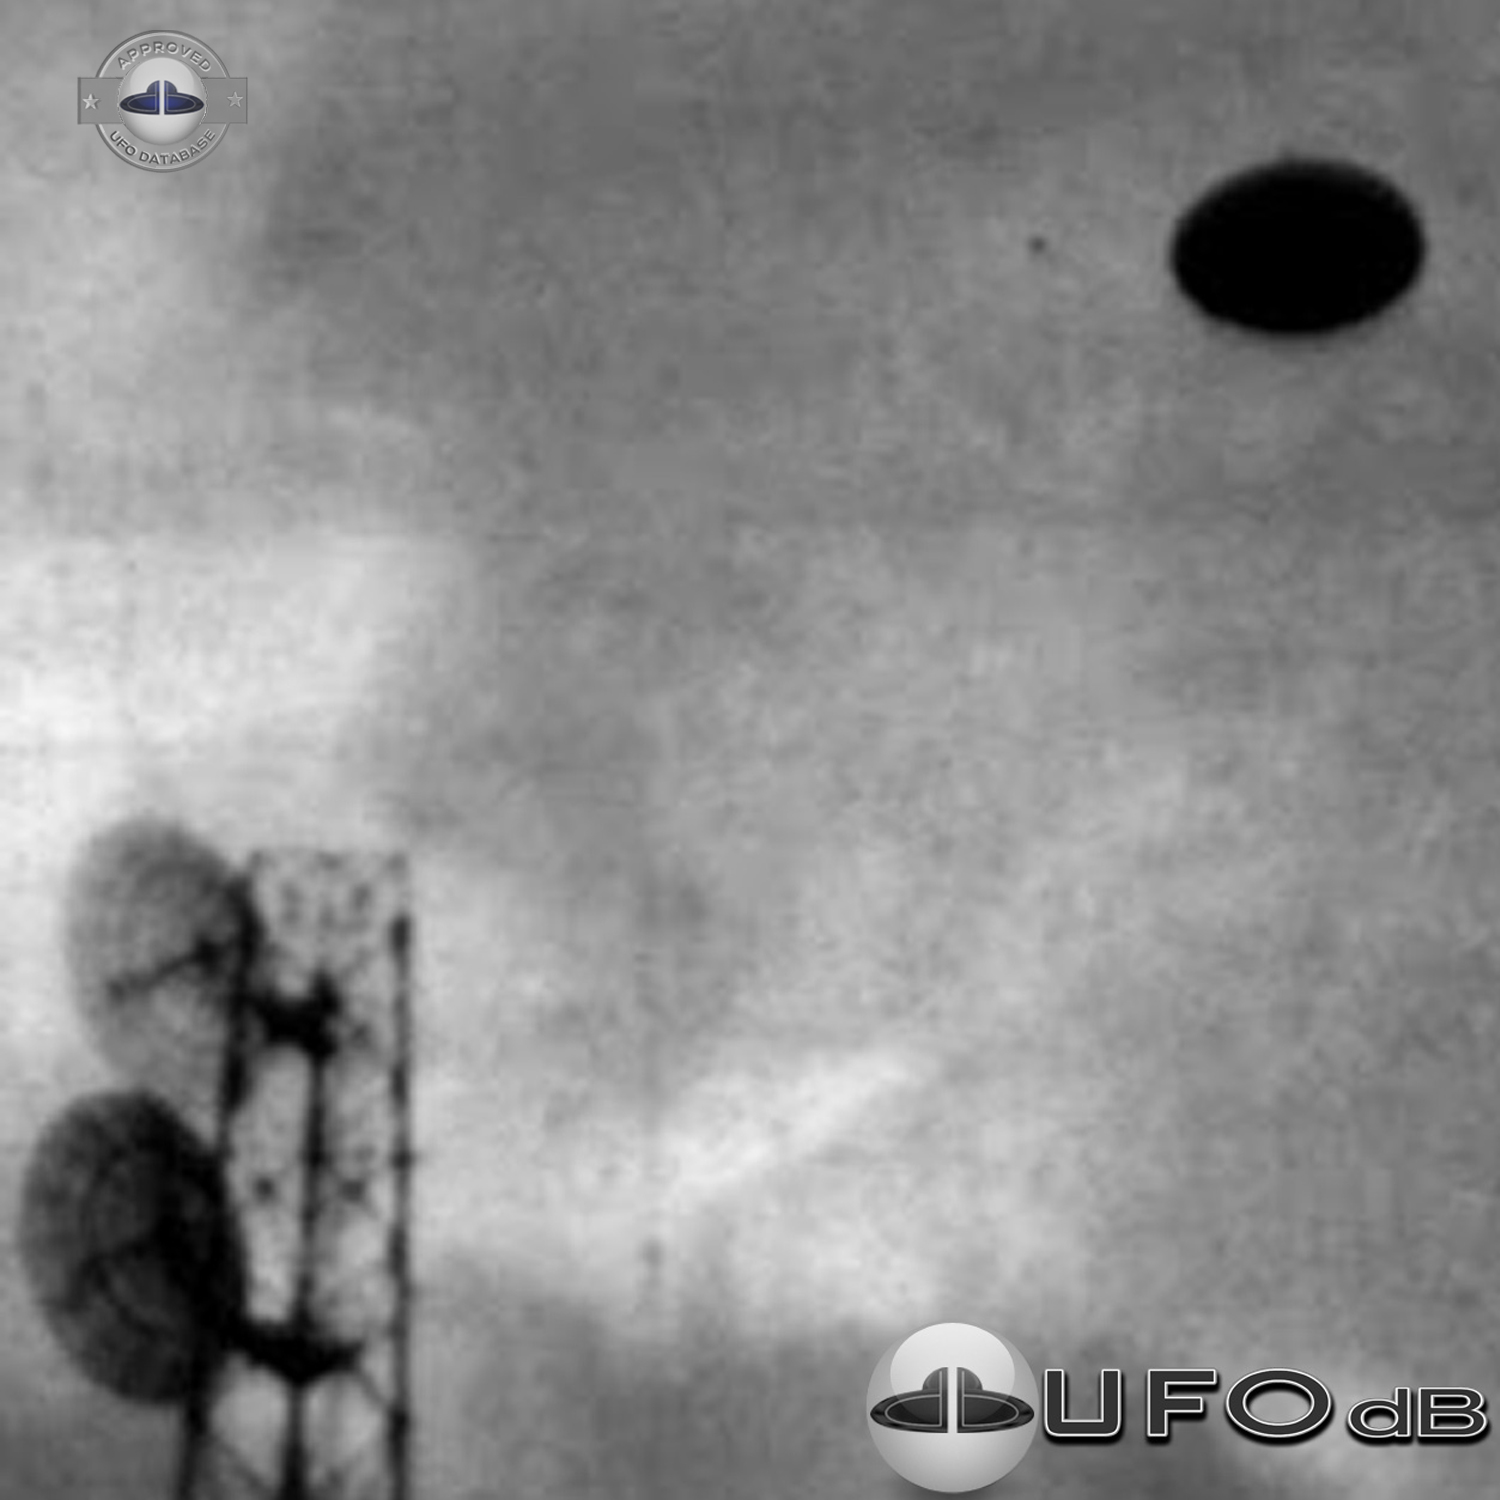 UFO passing near a communication tower in a cloudy sky Pescara Italy UFO Picture #125-2